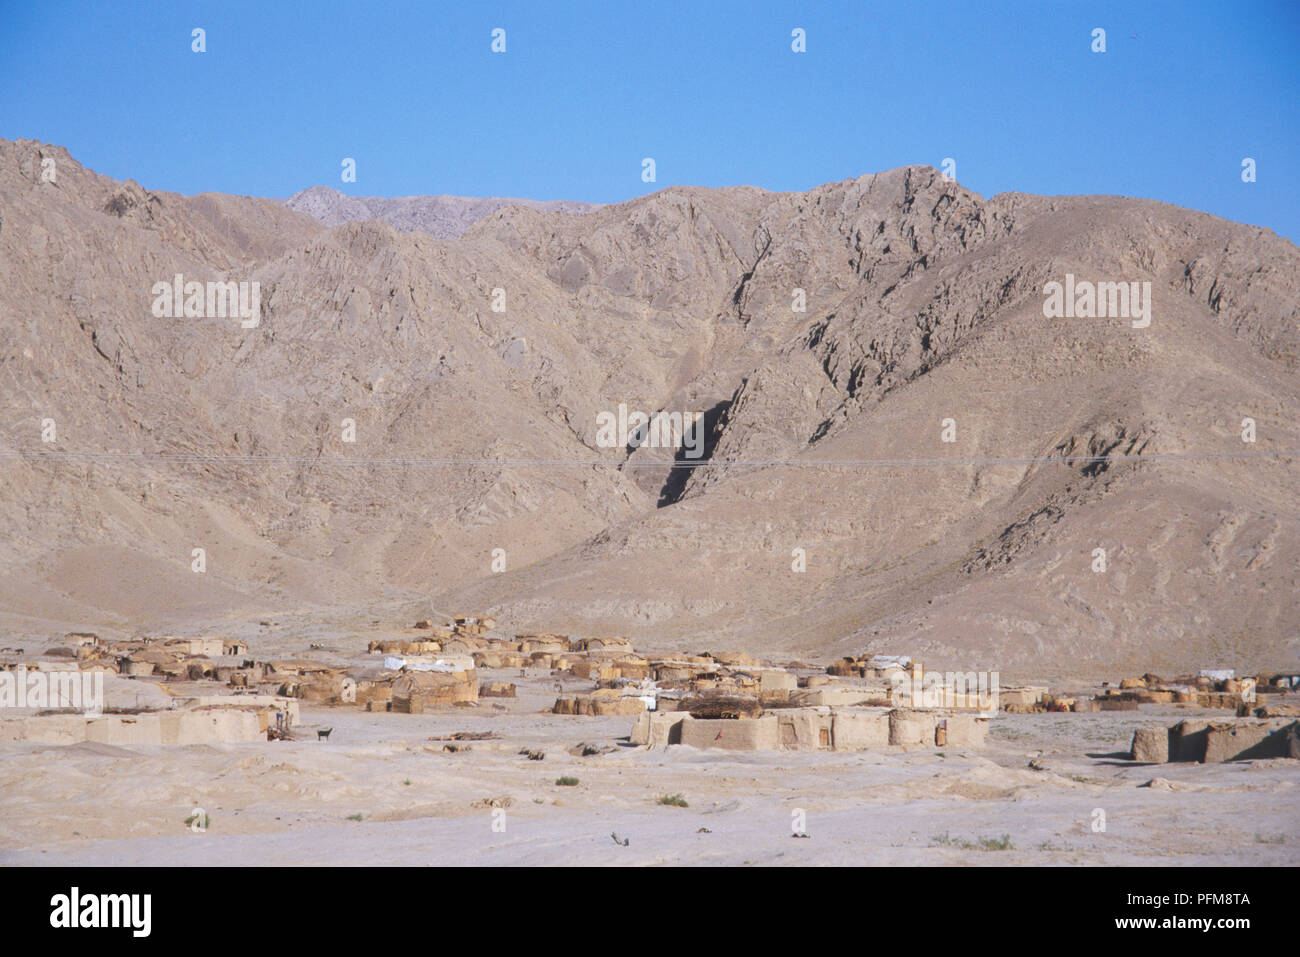 Nomad encampment north of Quetta. Quetta is the capital of Baluchistan province situated in an elevated valley near the Afghan border. Stock Photo